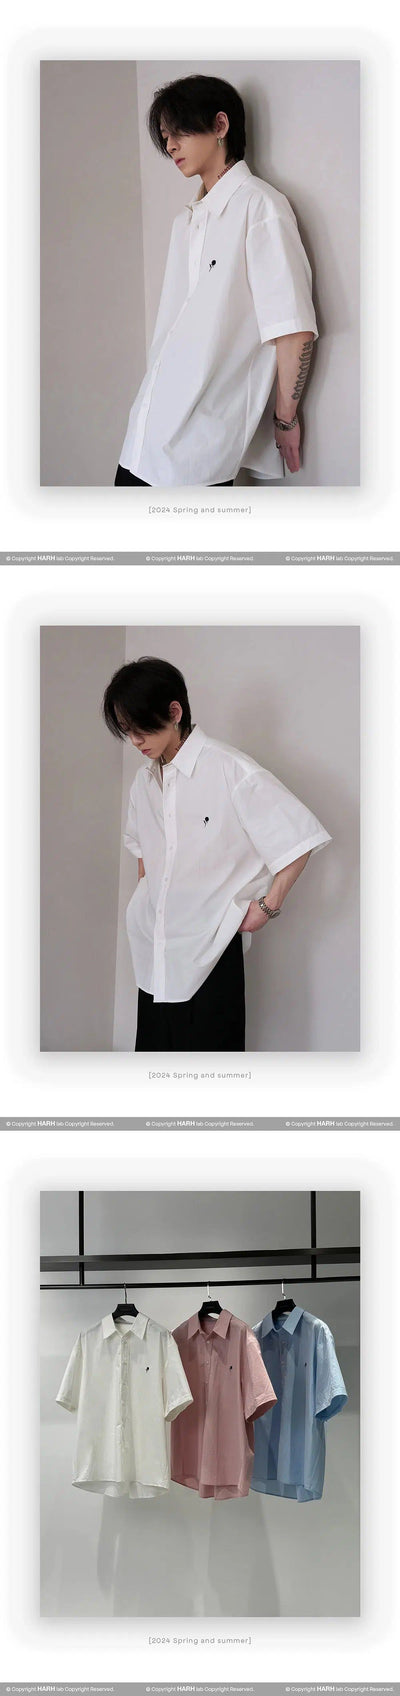 Rose Embroidery Clean Fit Shirt Korean Street Fashion Shirt By HARH Shop Online at OH Vault